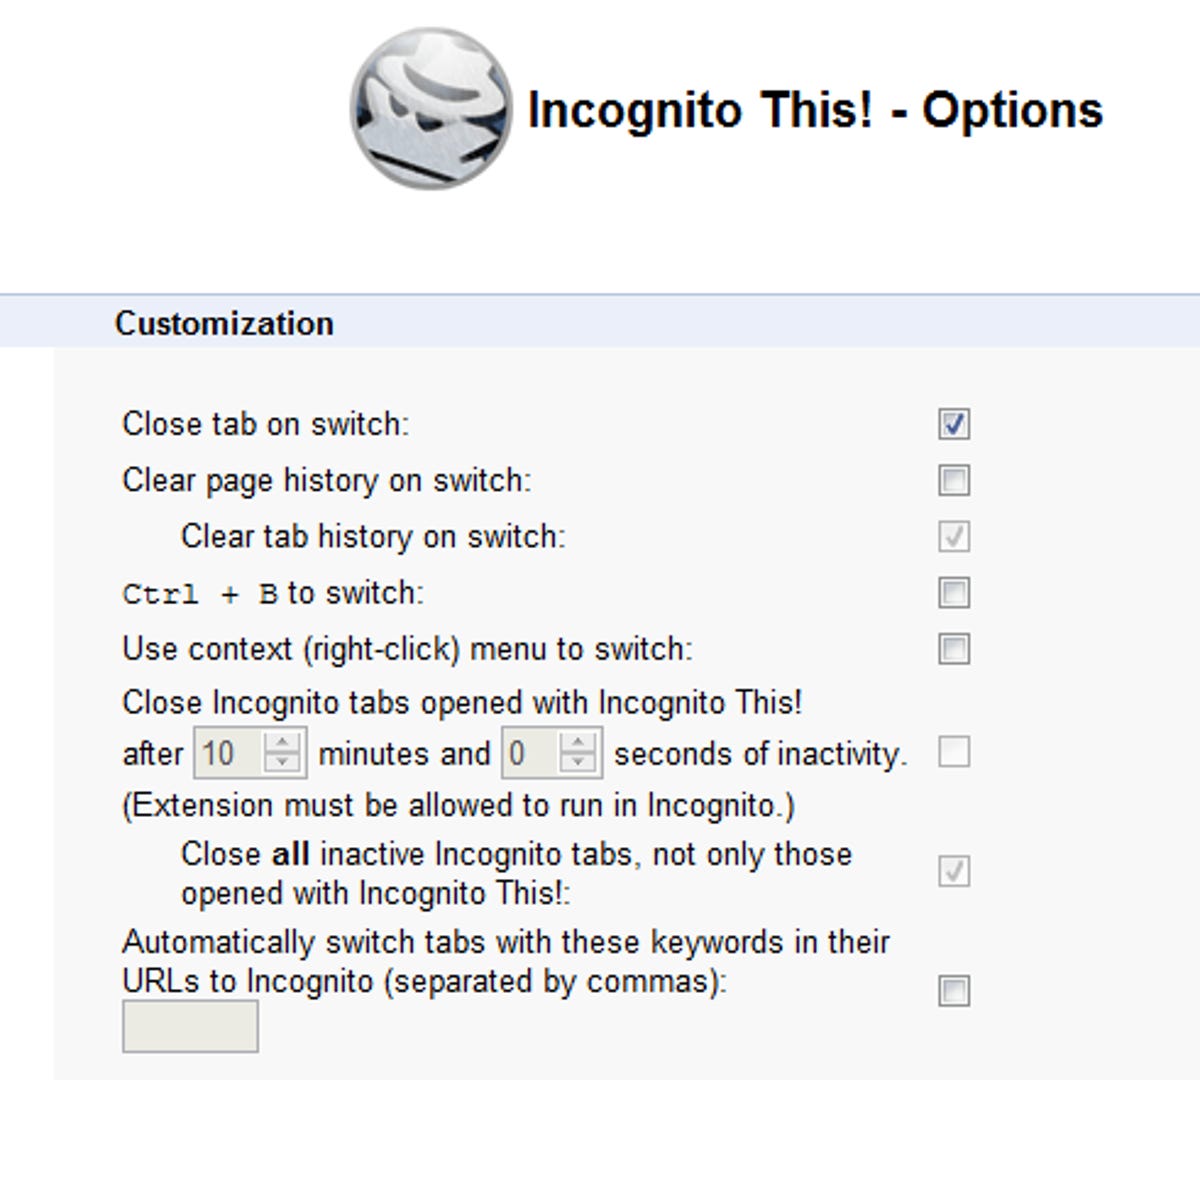 Options for Incognito This!